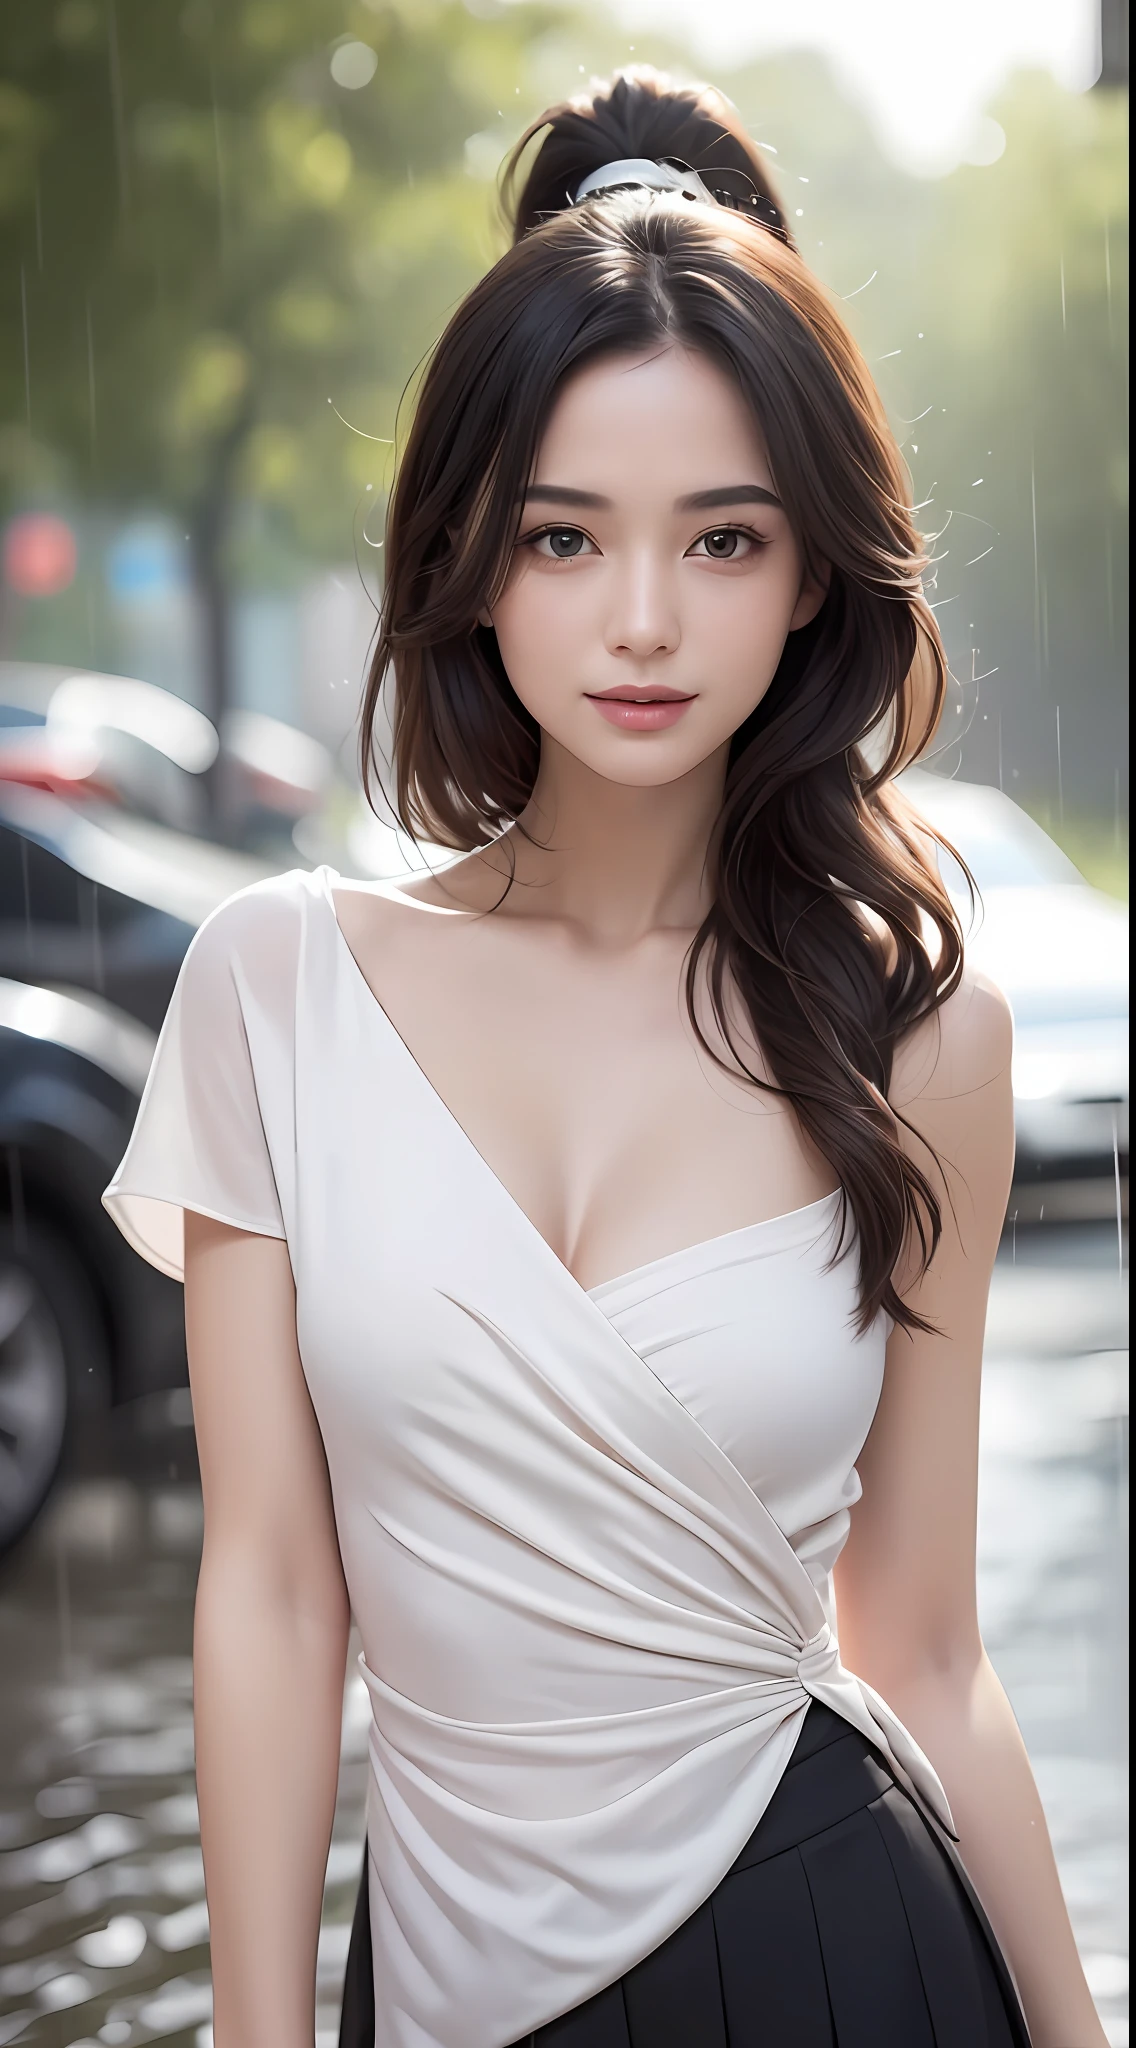 ((Best Quality, 8k, Masterpiece:1.3)), Focus: 1.2, Perfect Body Beauty: 1.4, Buttocks: 1.2, ((High Ponytail, Collarbone: 1.2)), (Short Skirt: 1.1) , (Rain, Street:1.3), Highly detailed face and skin texture, Fine eyes, Double eyelids, Whitened skin, Long hair, (Shut up: 1.3), Smile, Long legs, Full body, Best proportions of four fingers and one thumb, Smiley face, Face texture: 1.3, Sunshine, Summer, collarbone, beautiful eyes, real face, real skin, realistic face, realistic skin, detailed eyes, detailed facial features, detailed clothing features, detailed face, chest contour, tight fit, POS random, upper body silk wrap: 1.4